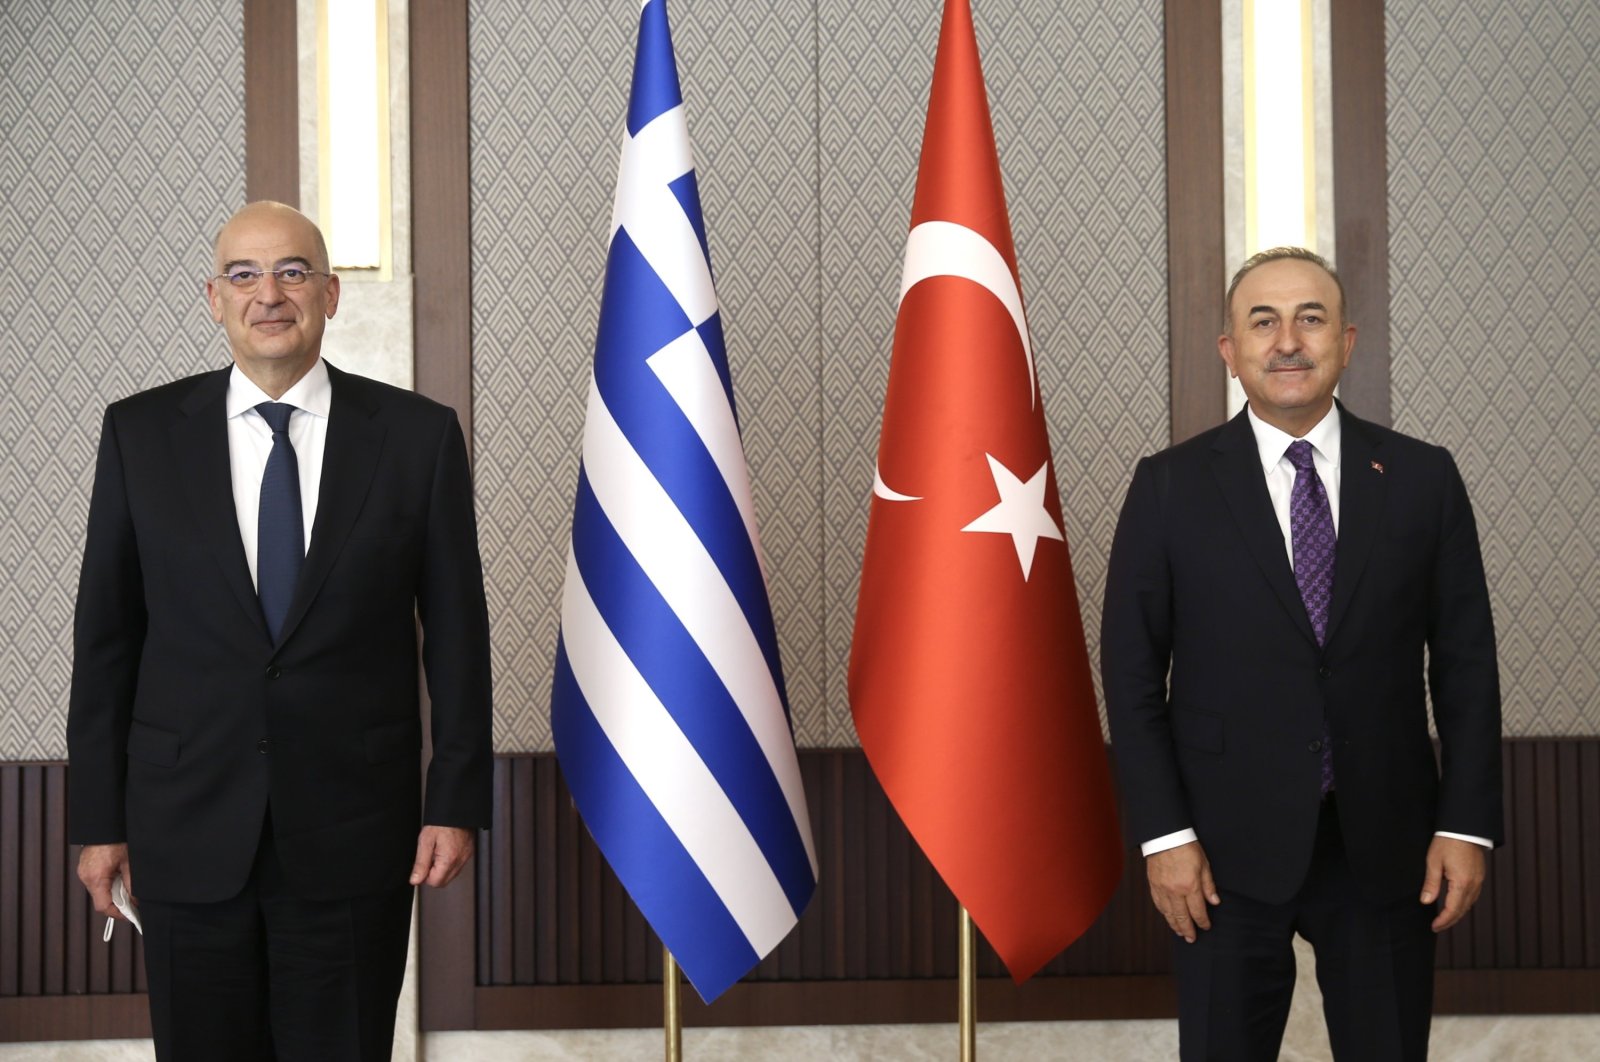 Greek Foreign Minister Nikos Dendias (L) and Turkish Foreign Minister Mevlüt Çavuşoğlu pose for a photo prior to their meeting in Ankara, Turkey, April 15, 2021. (Photo made available by the Turkish Foreign Ministry's press office/EPA Photo)